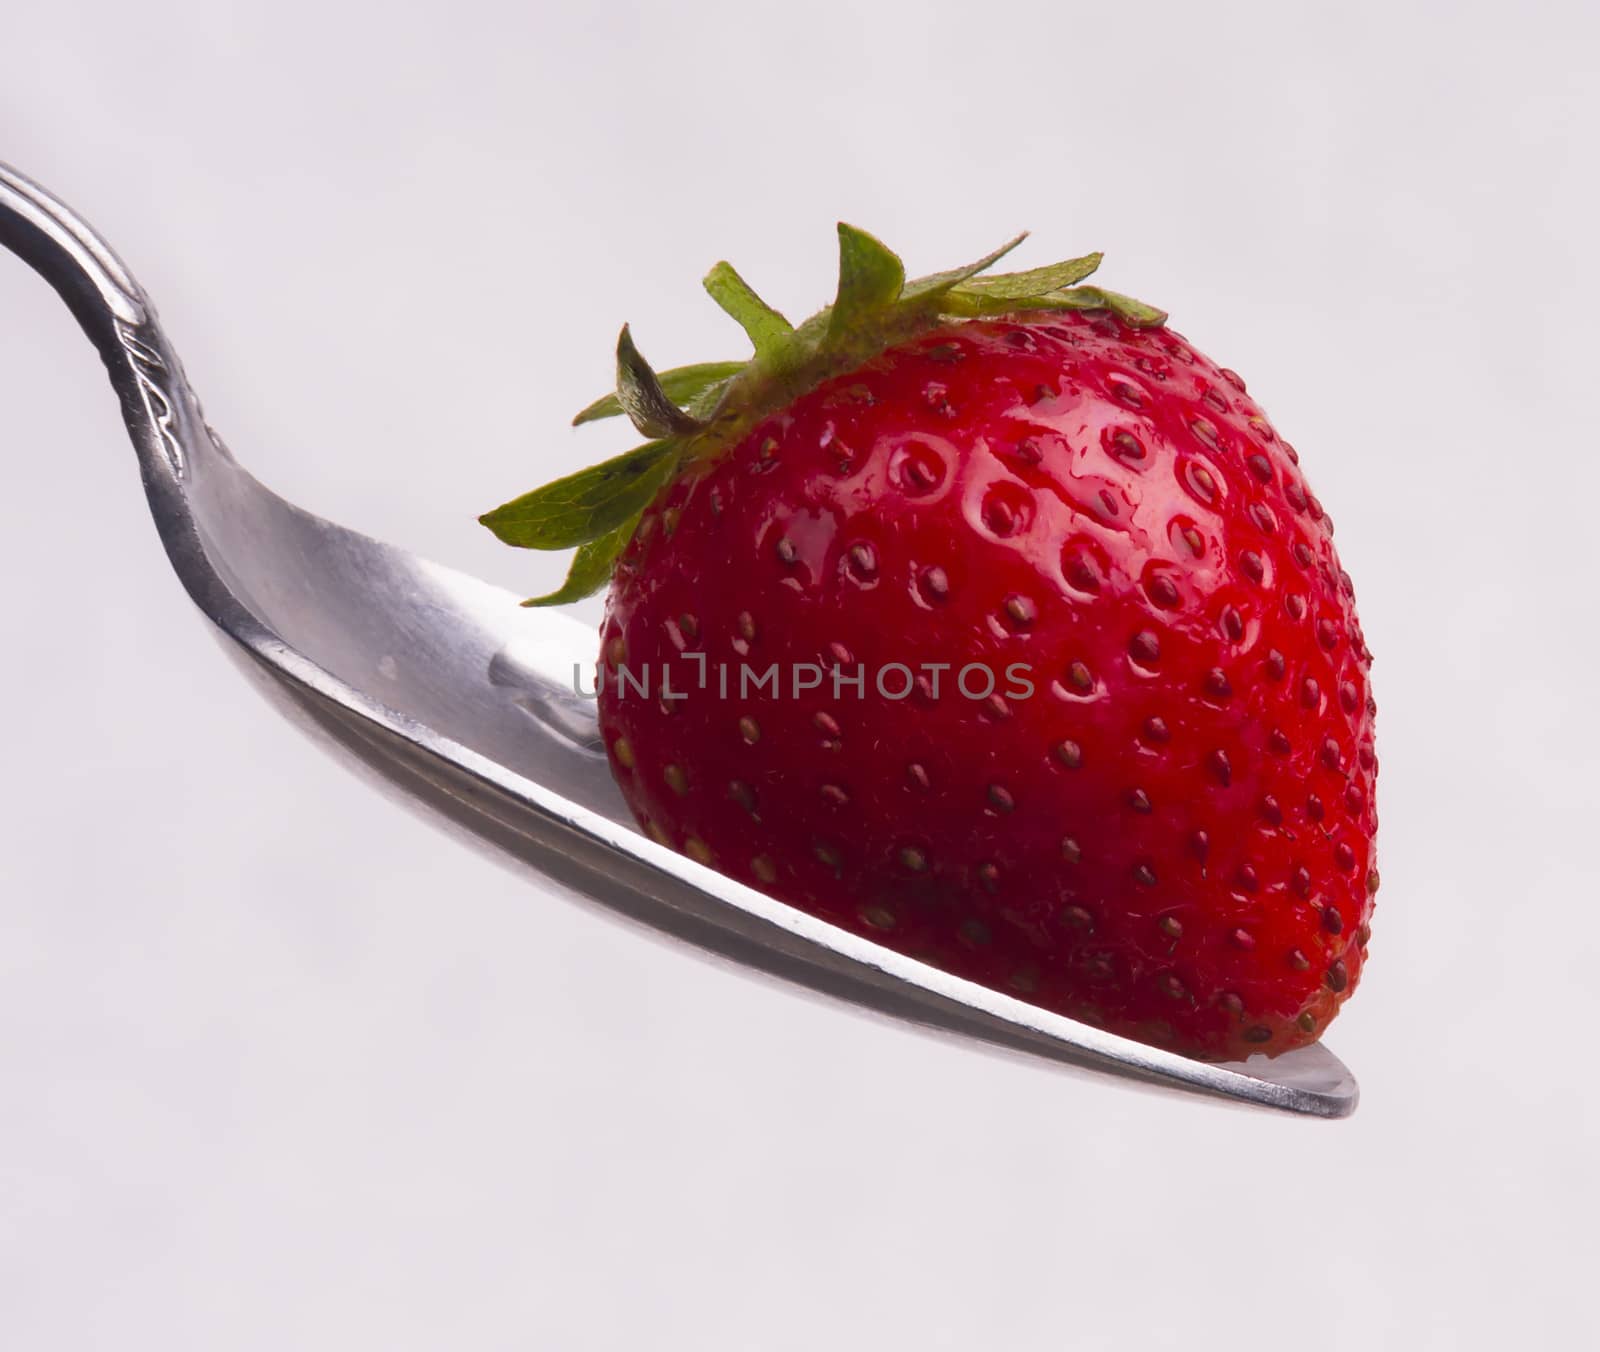 Sweet Red Food Fruit Raw Strawberry Siver Spoon Produce Ingredie by ChrisBoswell